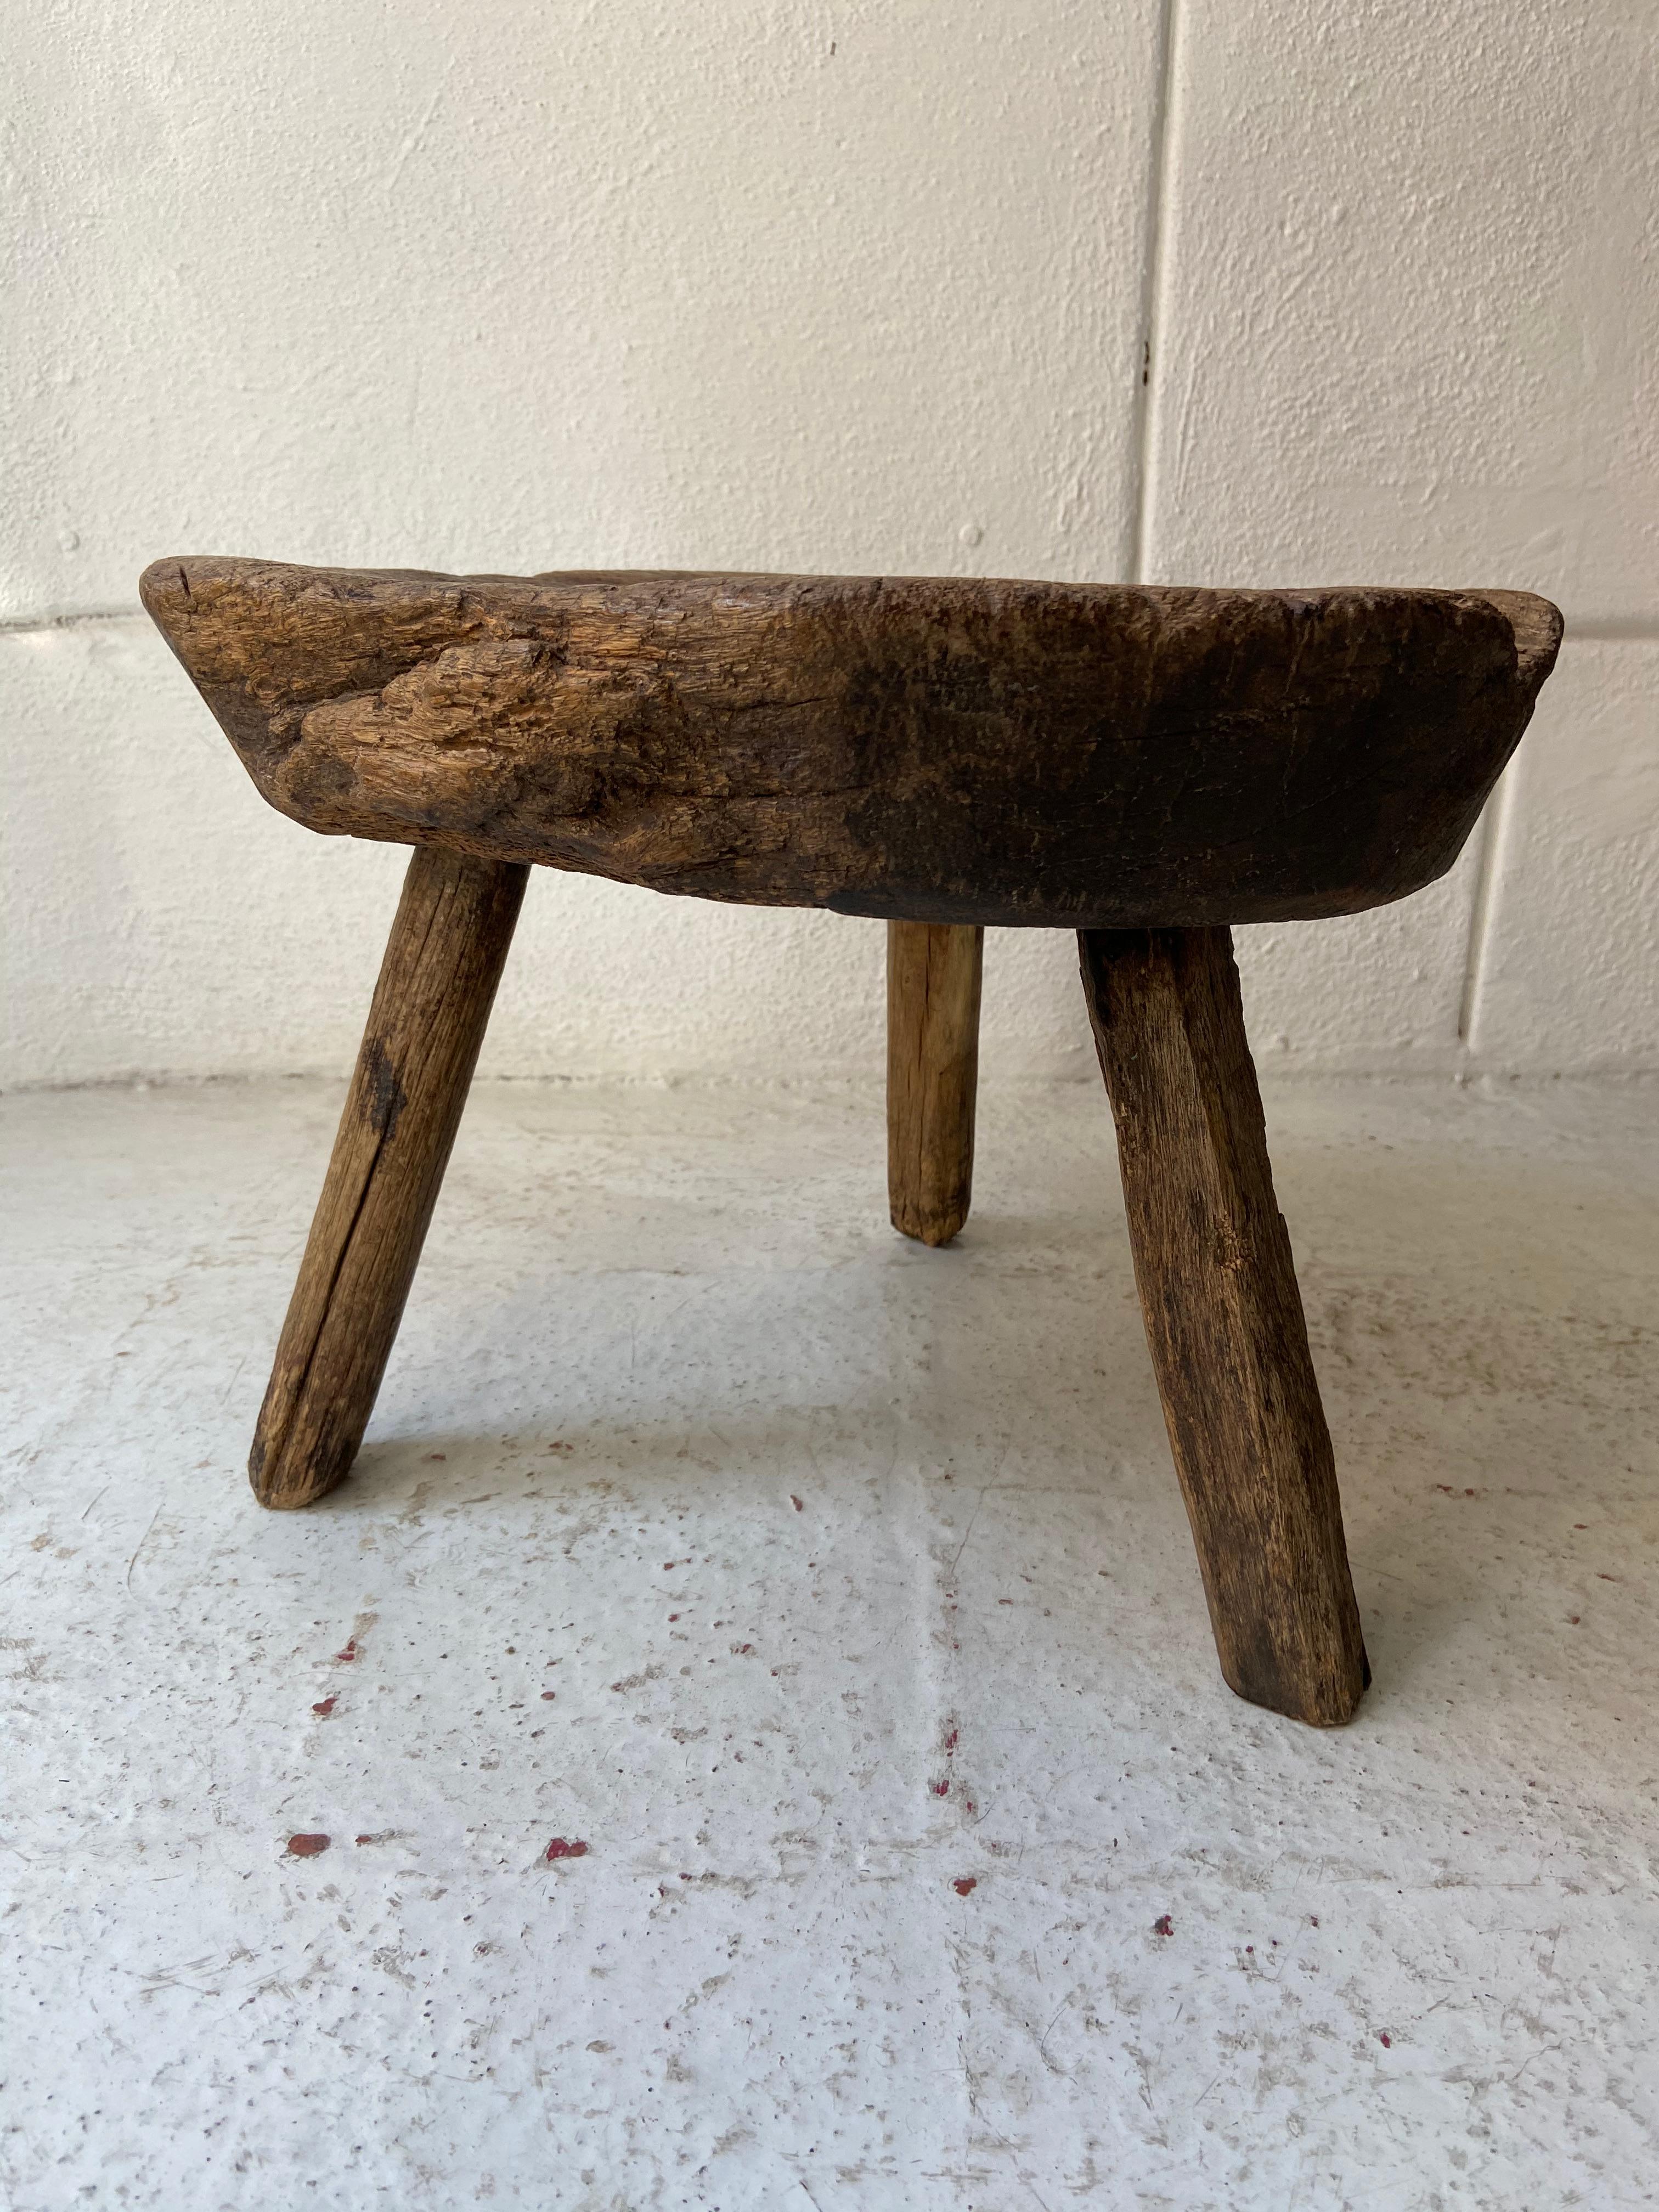 Mesquite low stool from San Felipe, Guanajuato, circa early 1900s. All hand carved, all original legs.